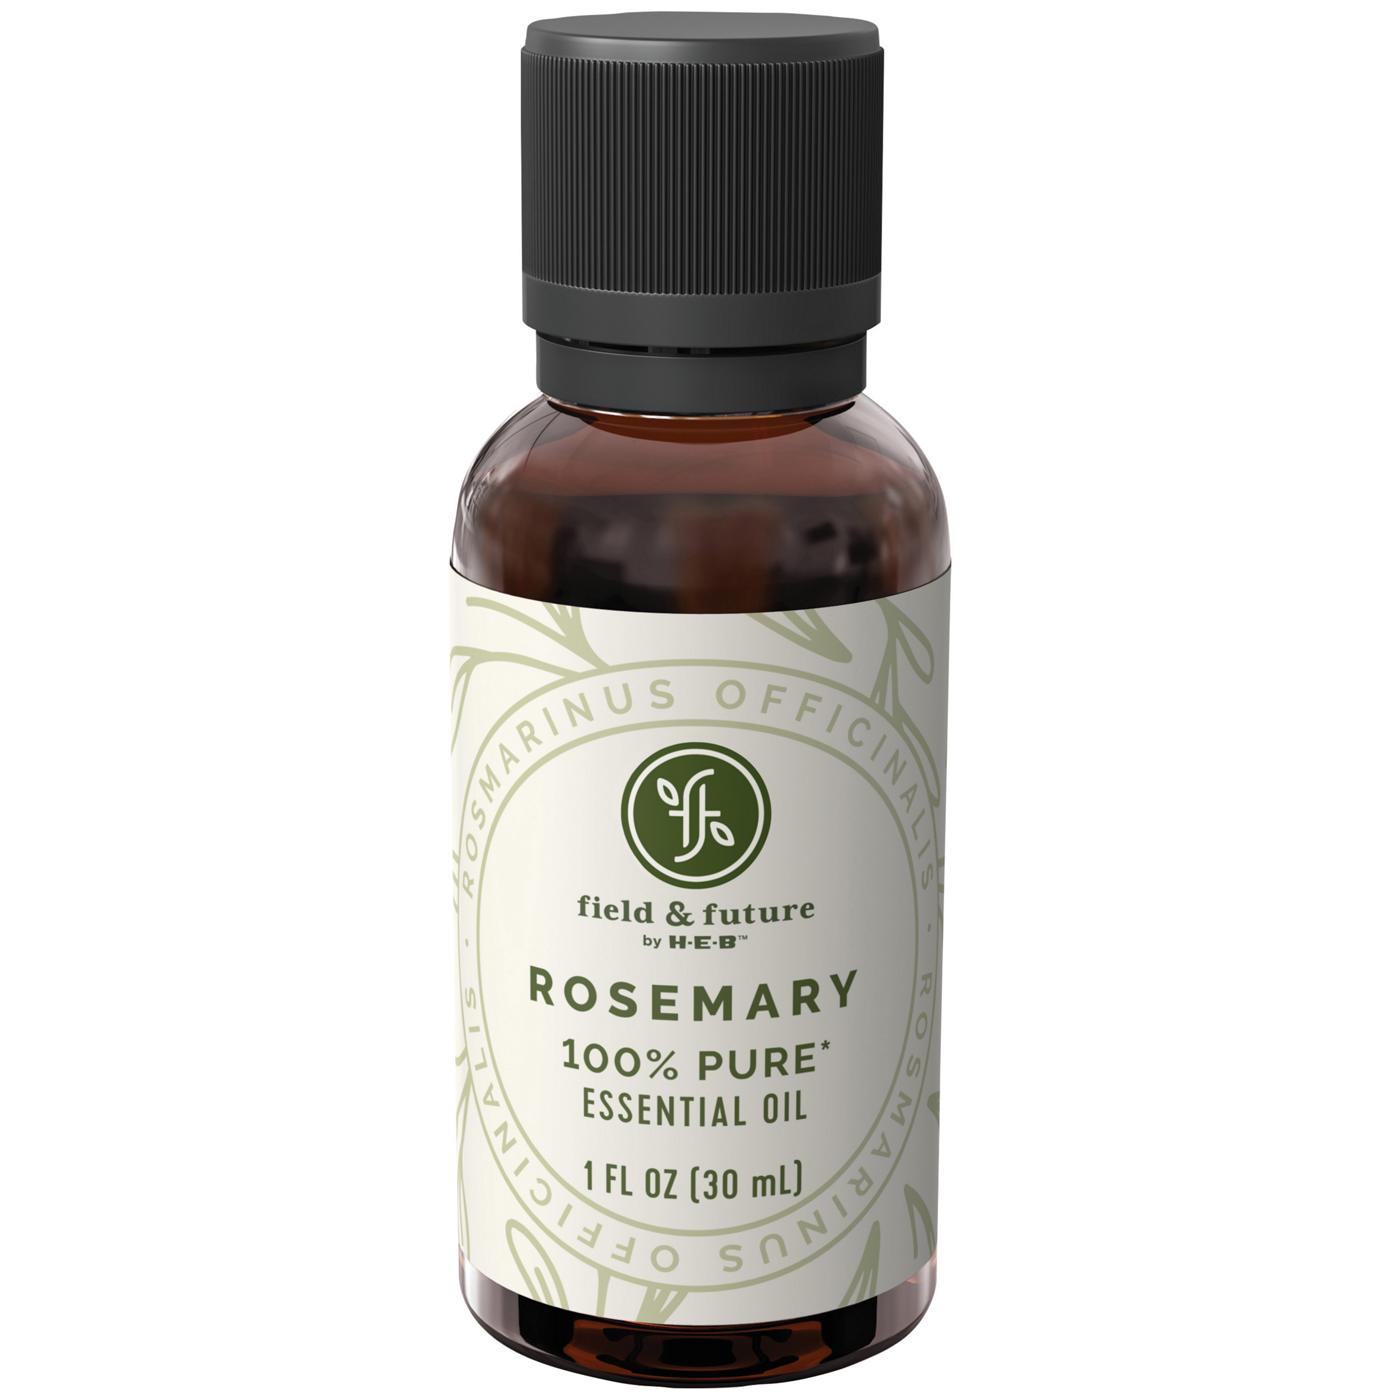 Field & Future by H-E-B Rosemary Essential Oil; image 1 of 5